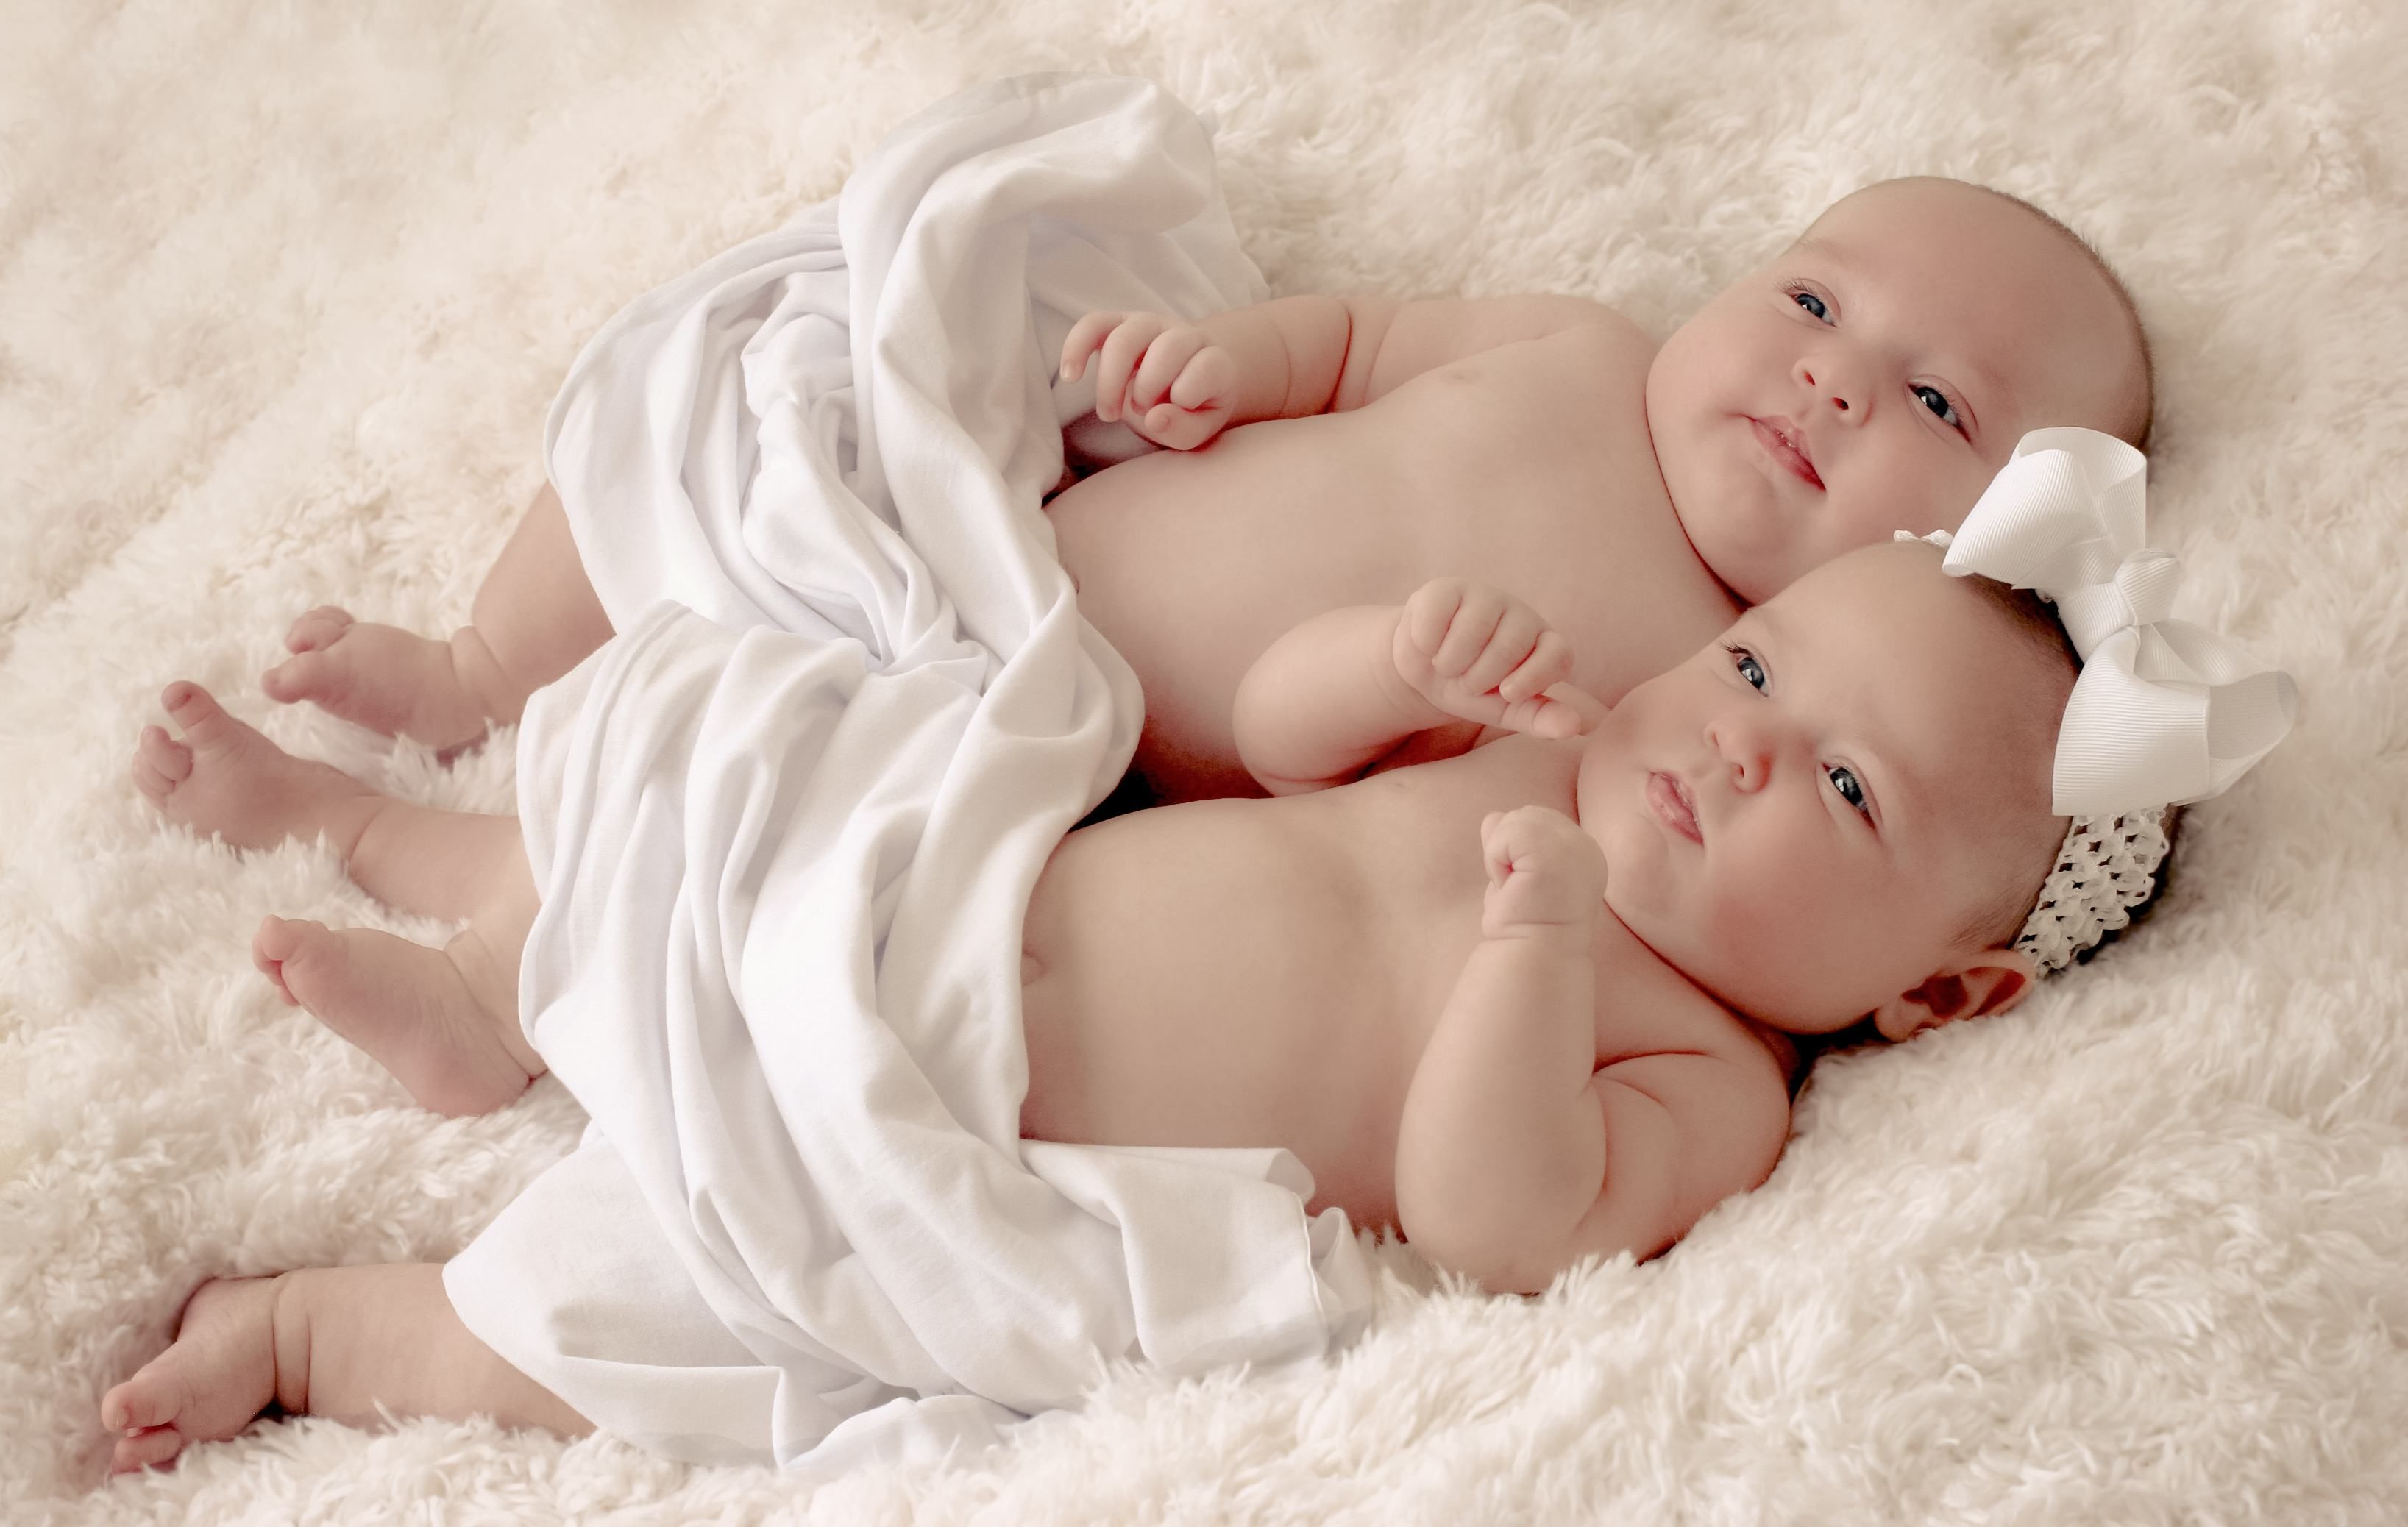 New Born Baby Wallpaper Wallpaper Background of Your